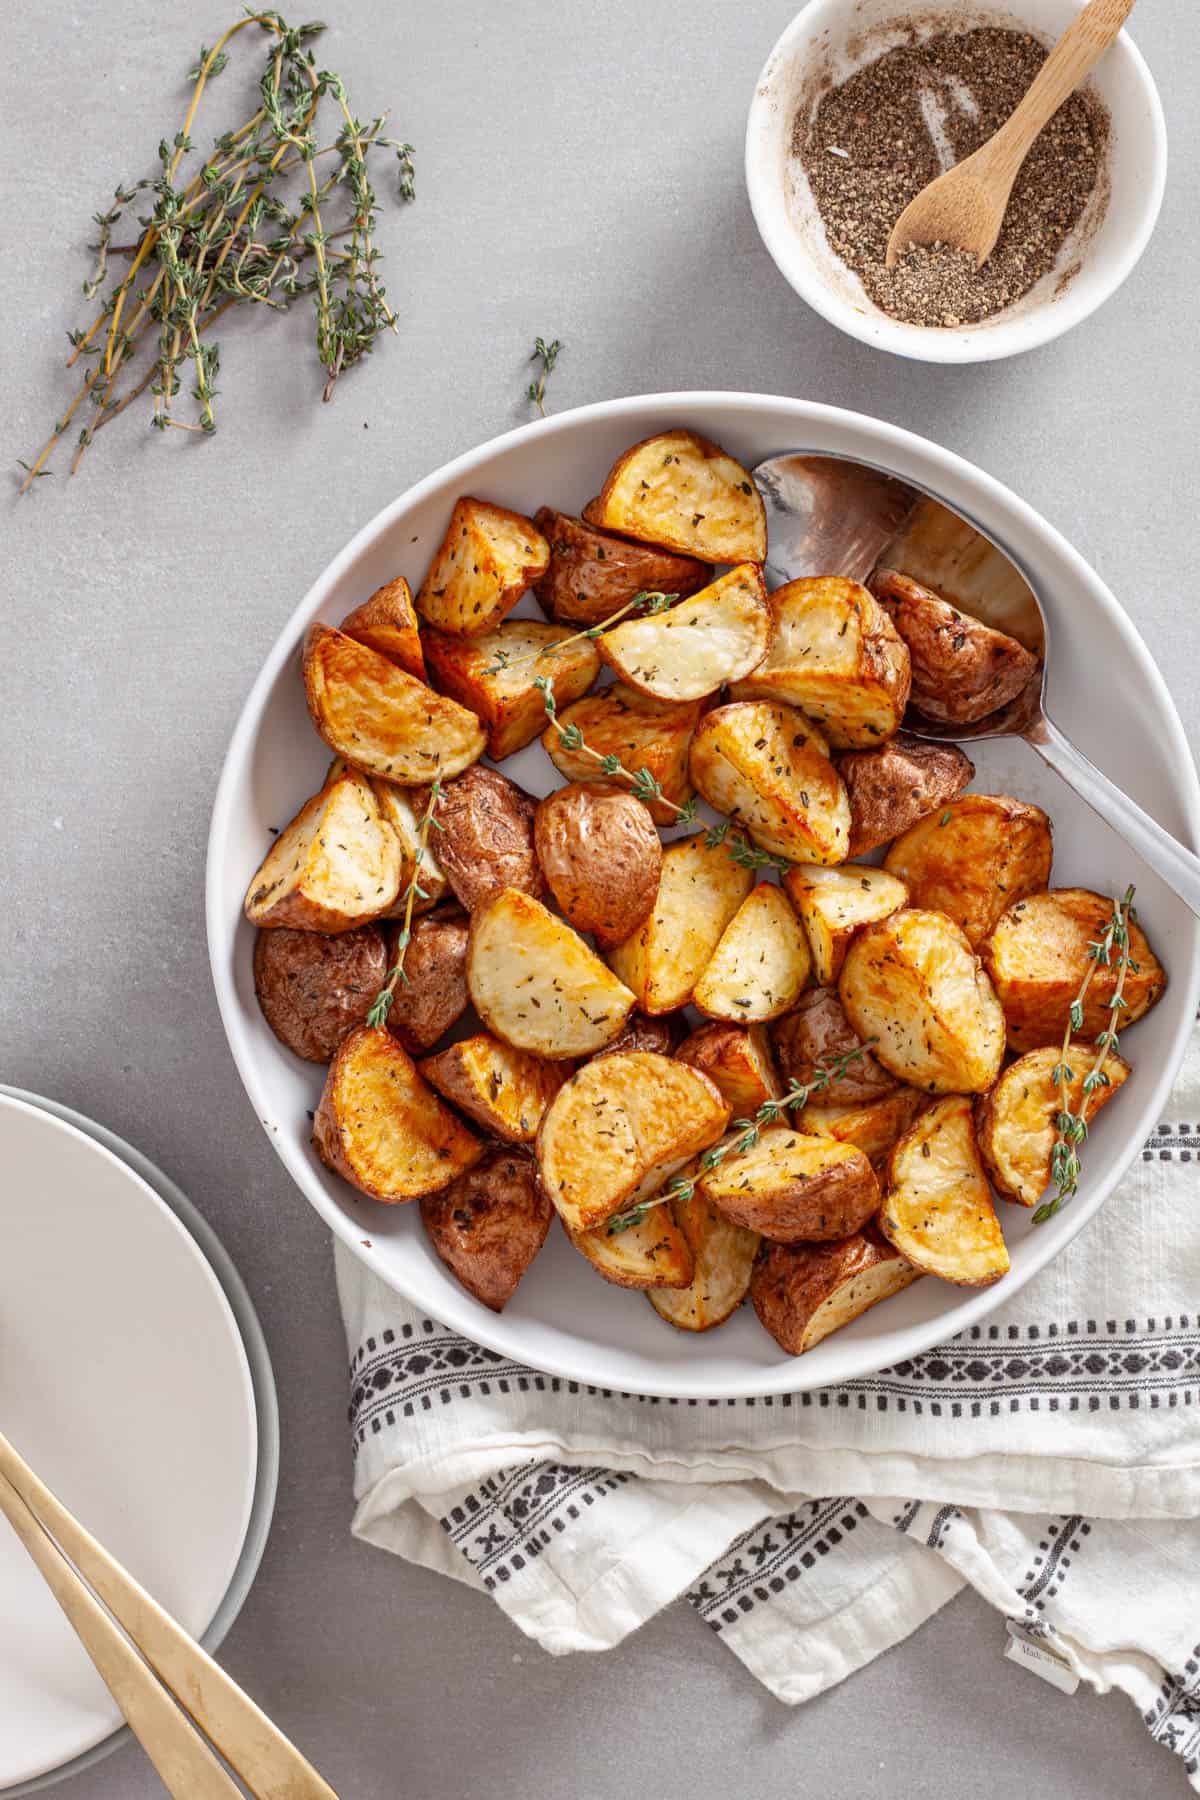 A serving bowl of crispy air fried red potatoes garnished with sprigs of fresh thyme and a bowl of black pepper to the side.